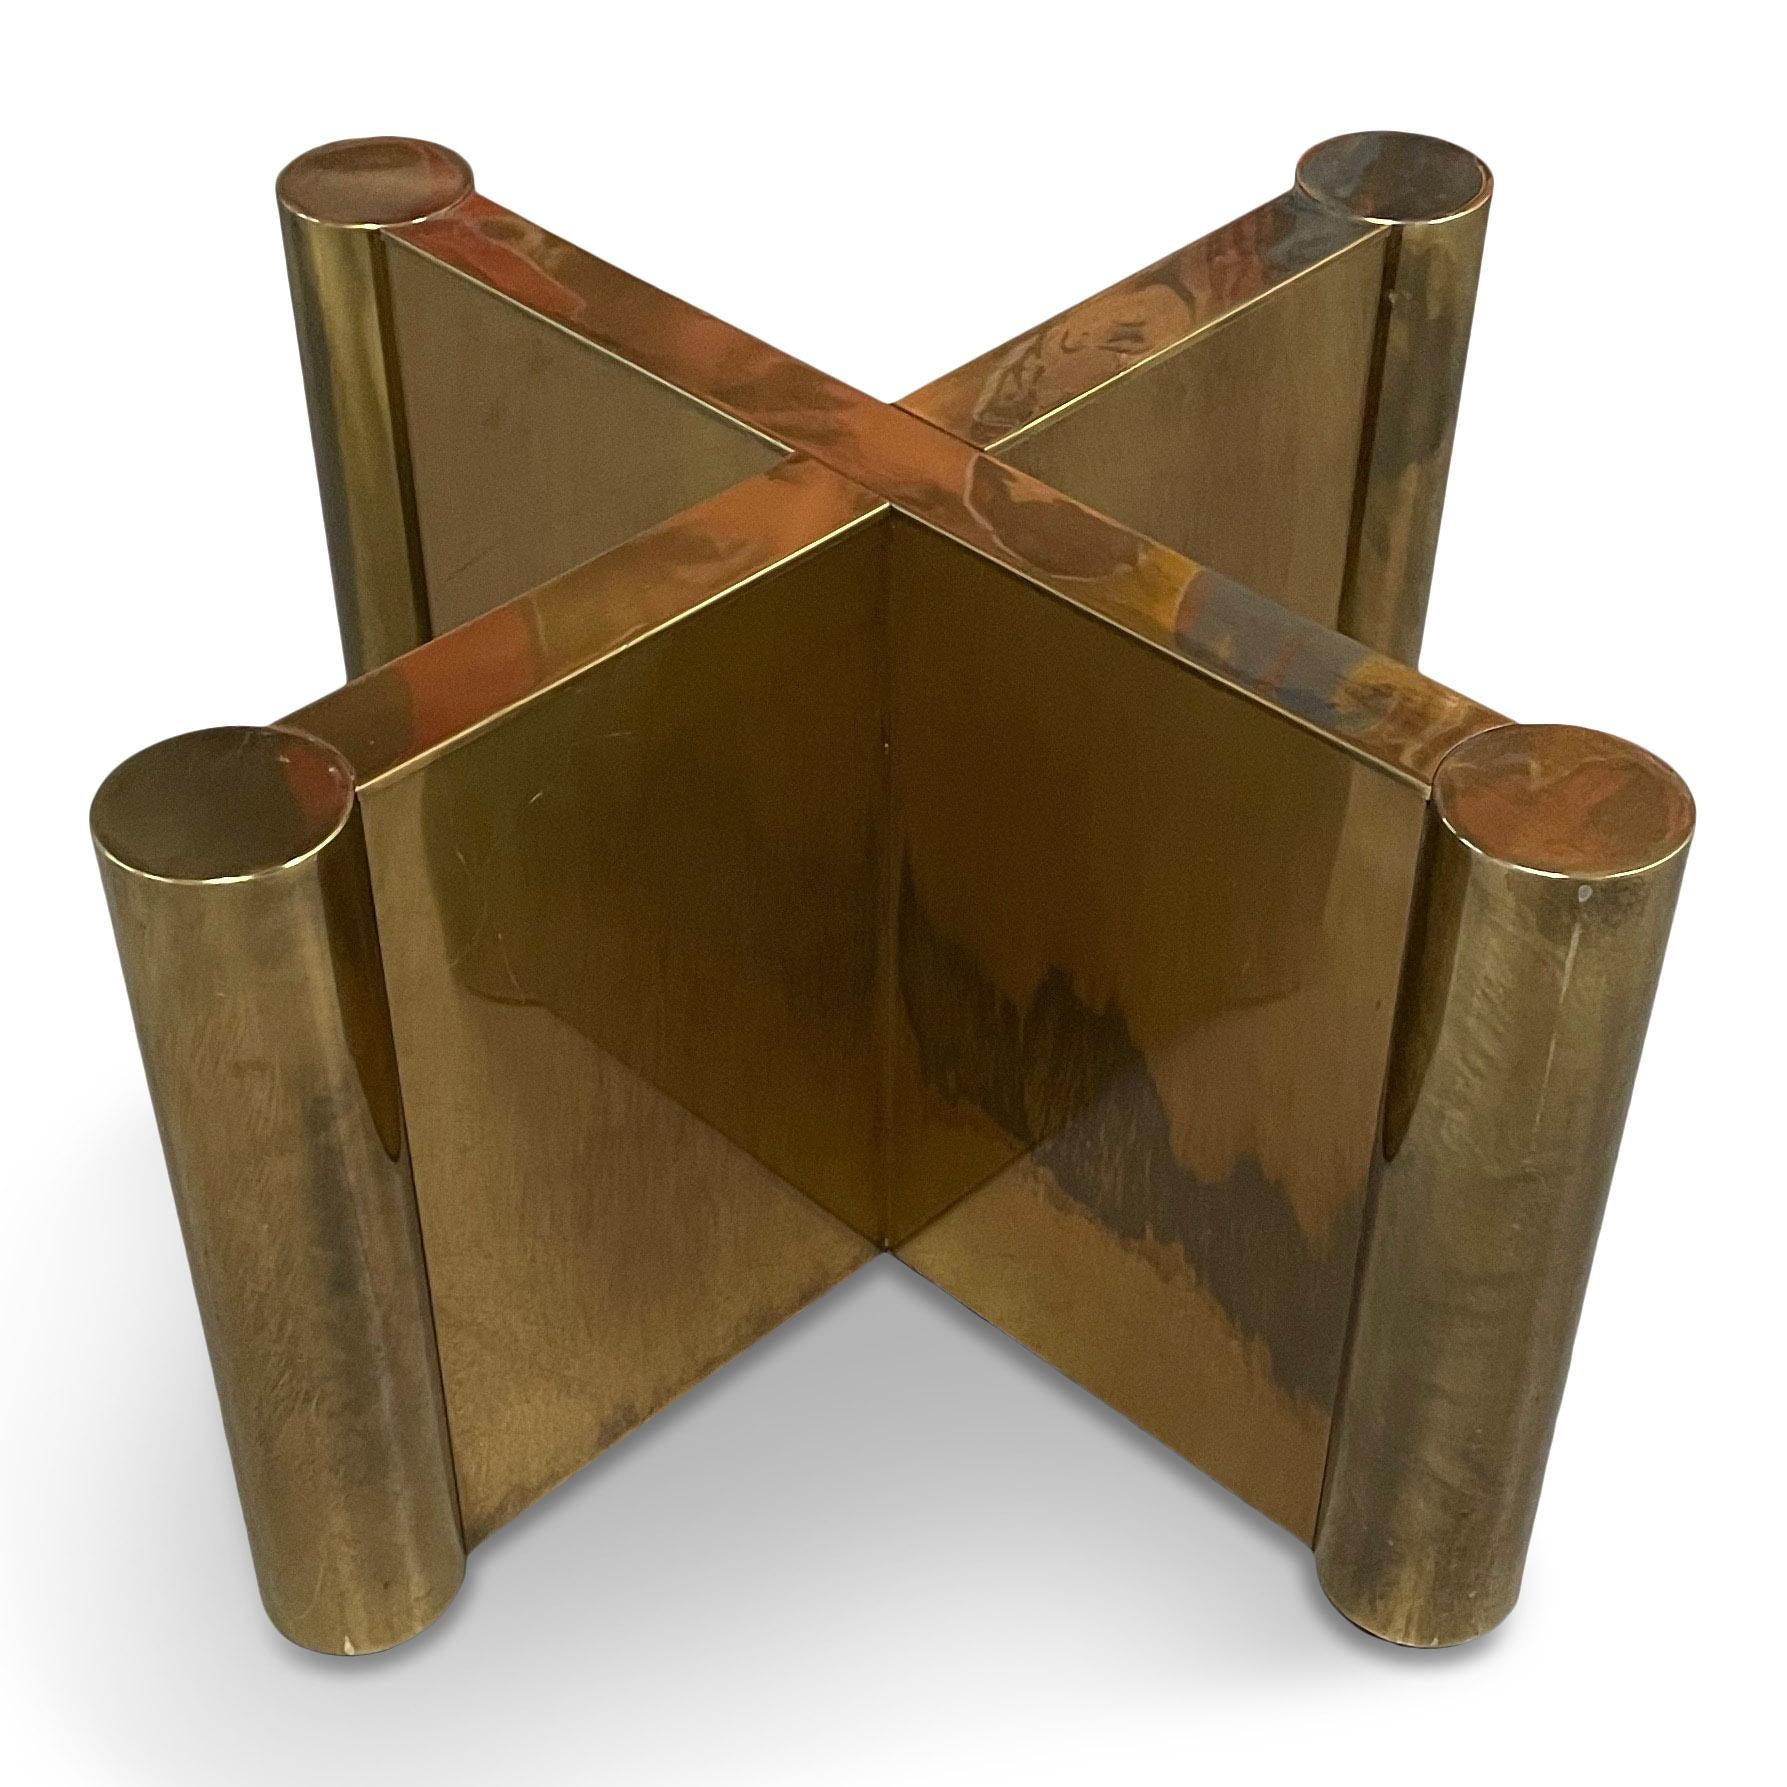 Classic Mastercraft quality in this wonderful, warm brass patinated coffee table. The original beveled glass is in good condition.